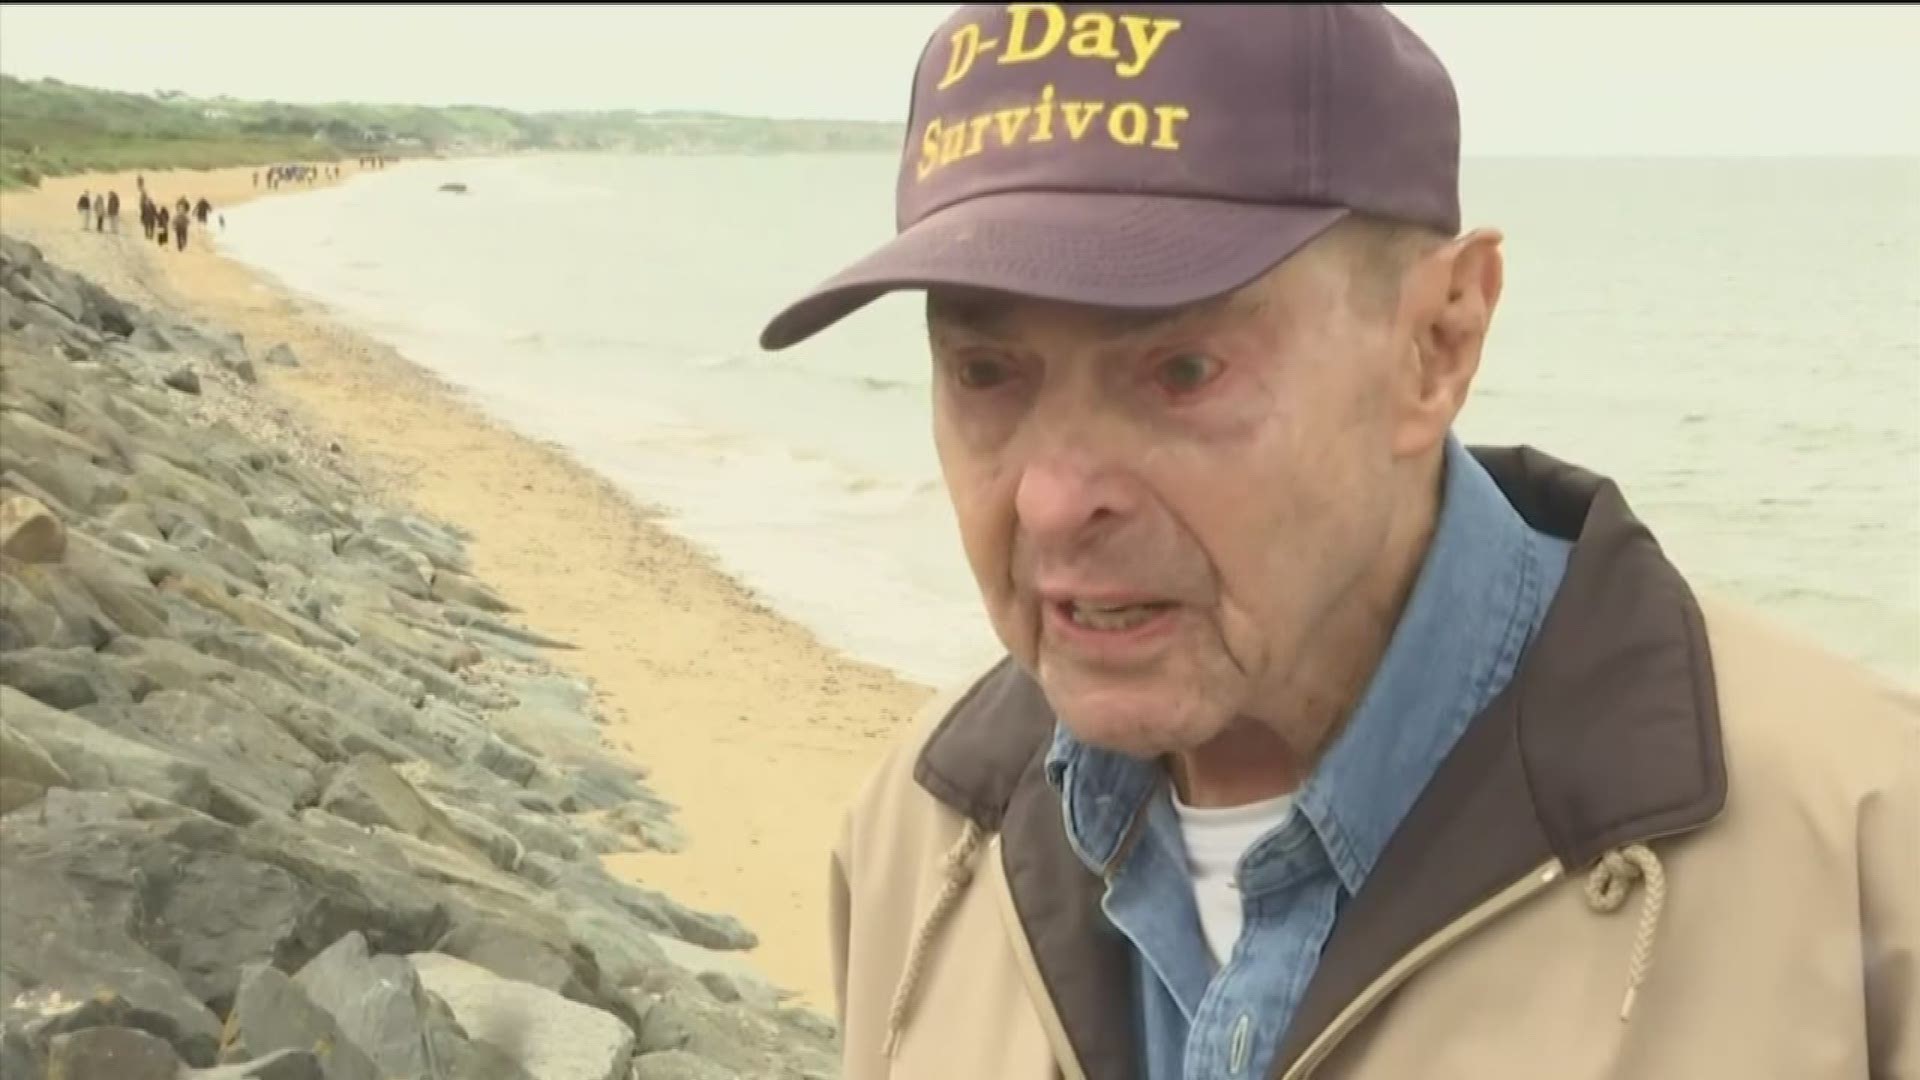 A veteran who fought on D-Day in 1944 is commemorating the 75th anniversary by returning to the battle scene – Omaha Beach. Retired Army medic Ray Lambert was a 20 years-old Army Staff Sergeant on D-Day. He helped save many lives and watched helplessly as countless others died before his eyes.